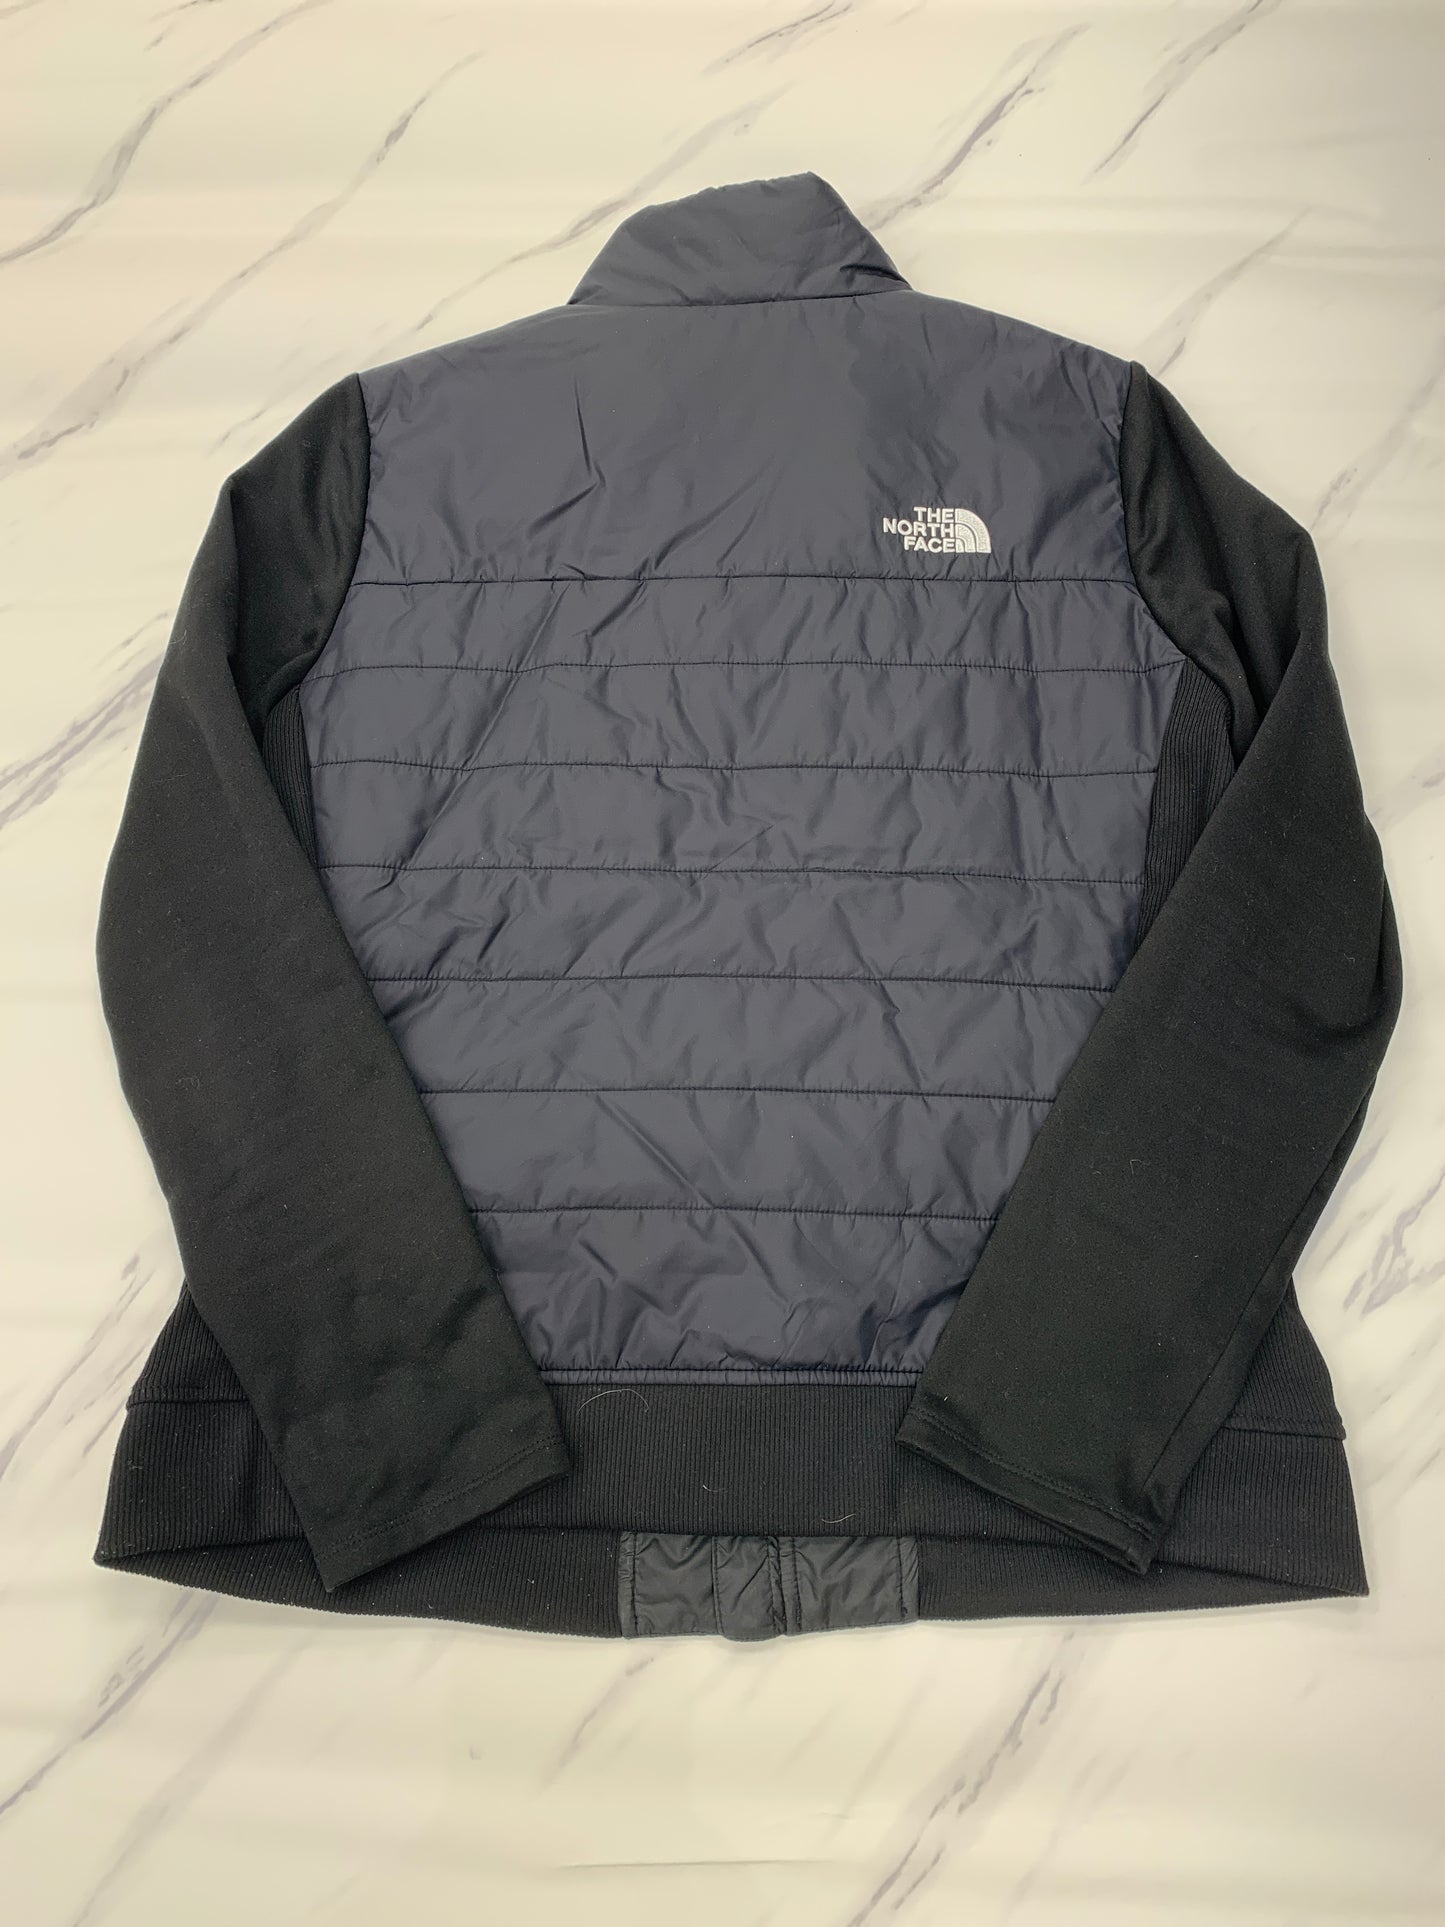 Athletic Jacket By The North Face  Size: Xl